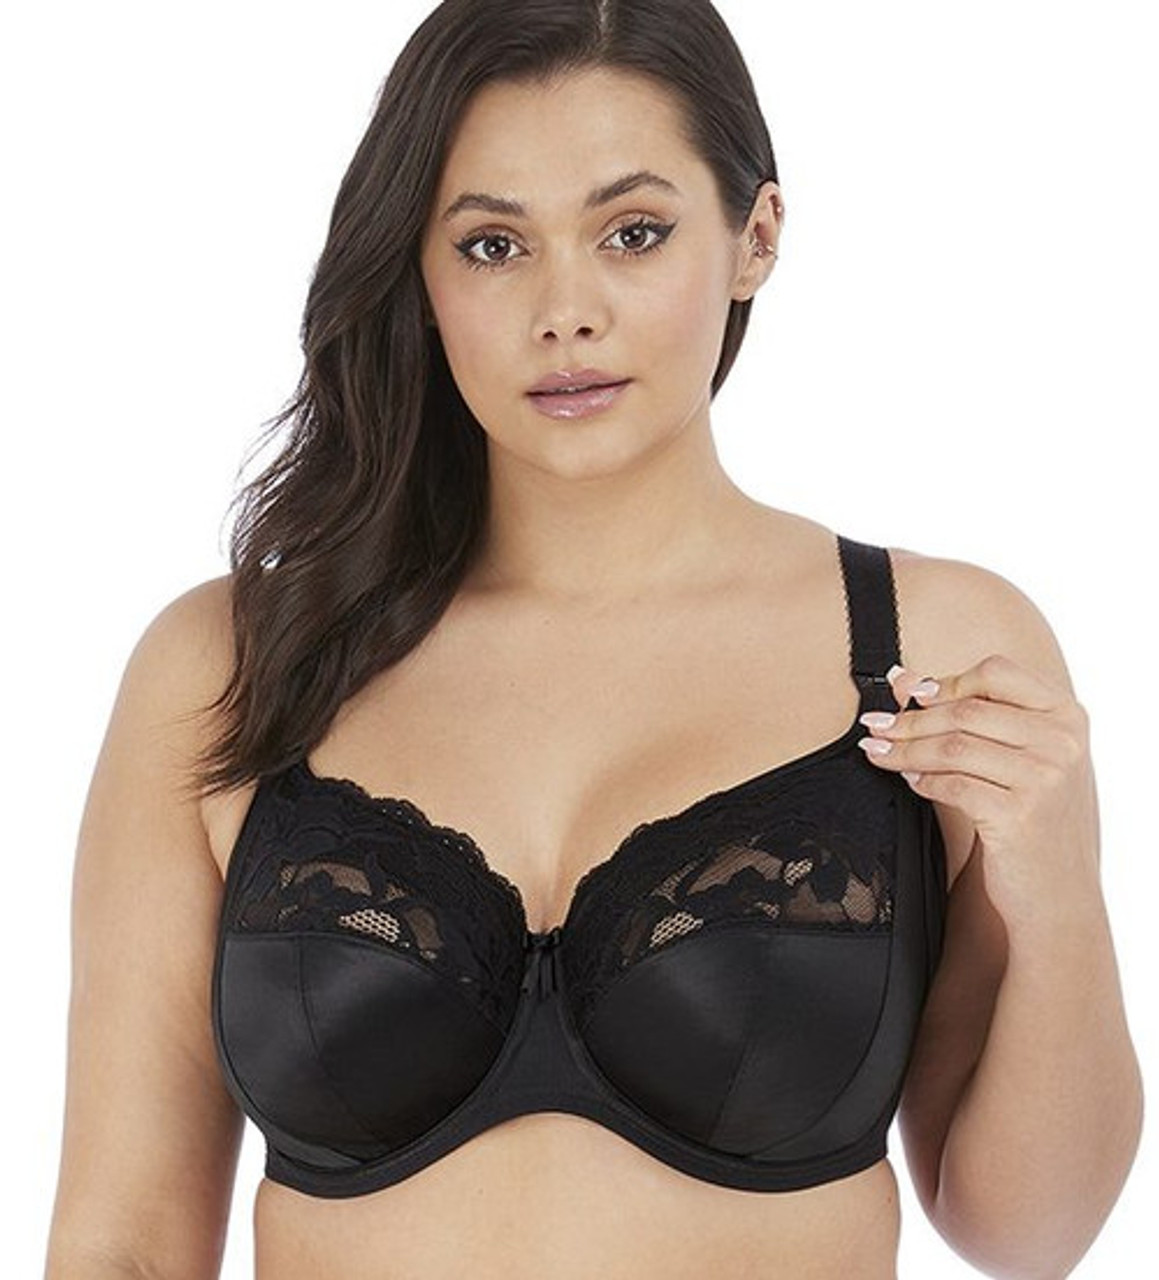 Plus Size Bras 32H, Bras for Large Breasts